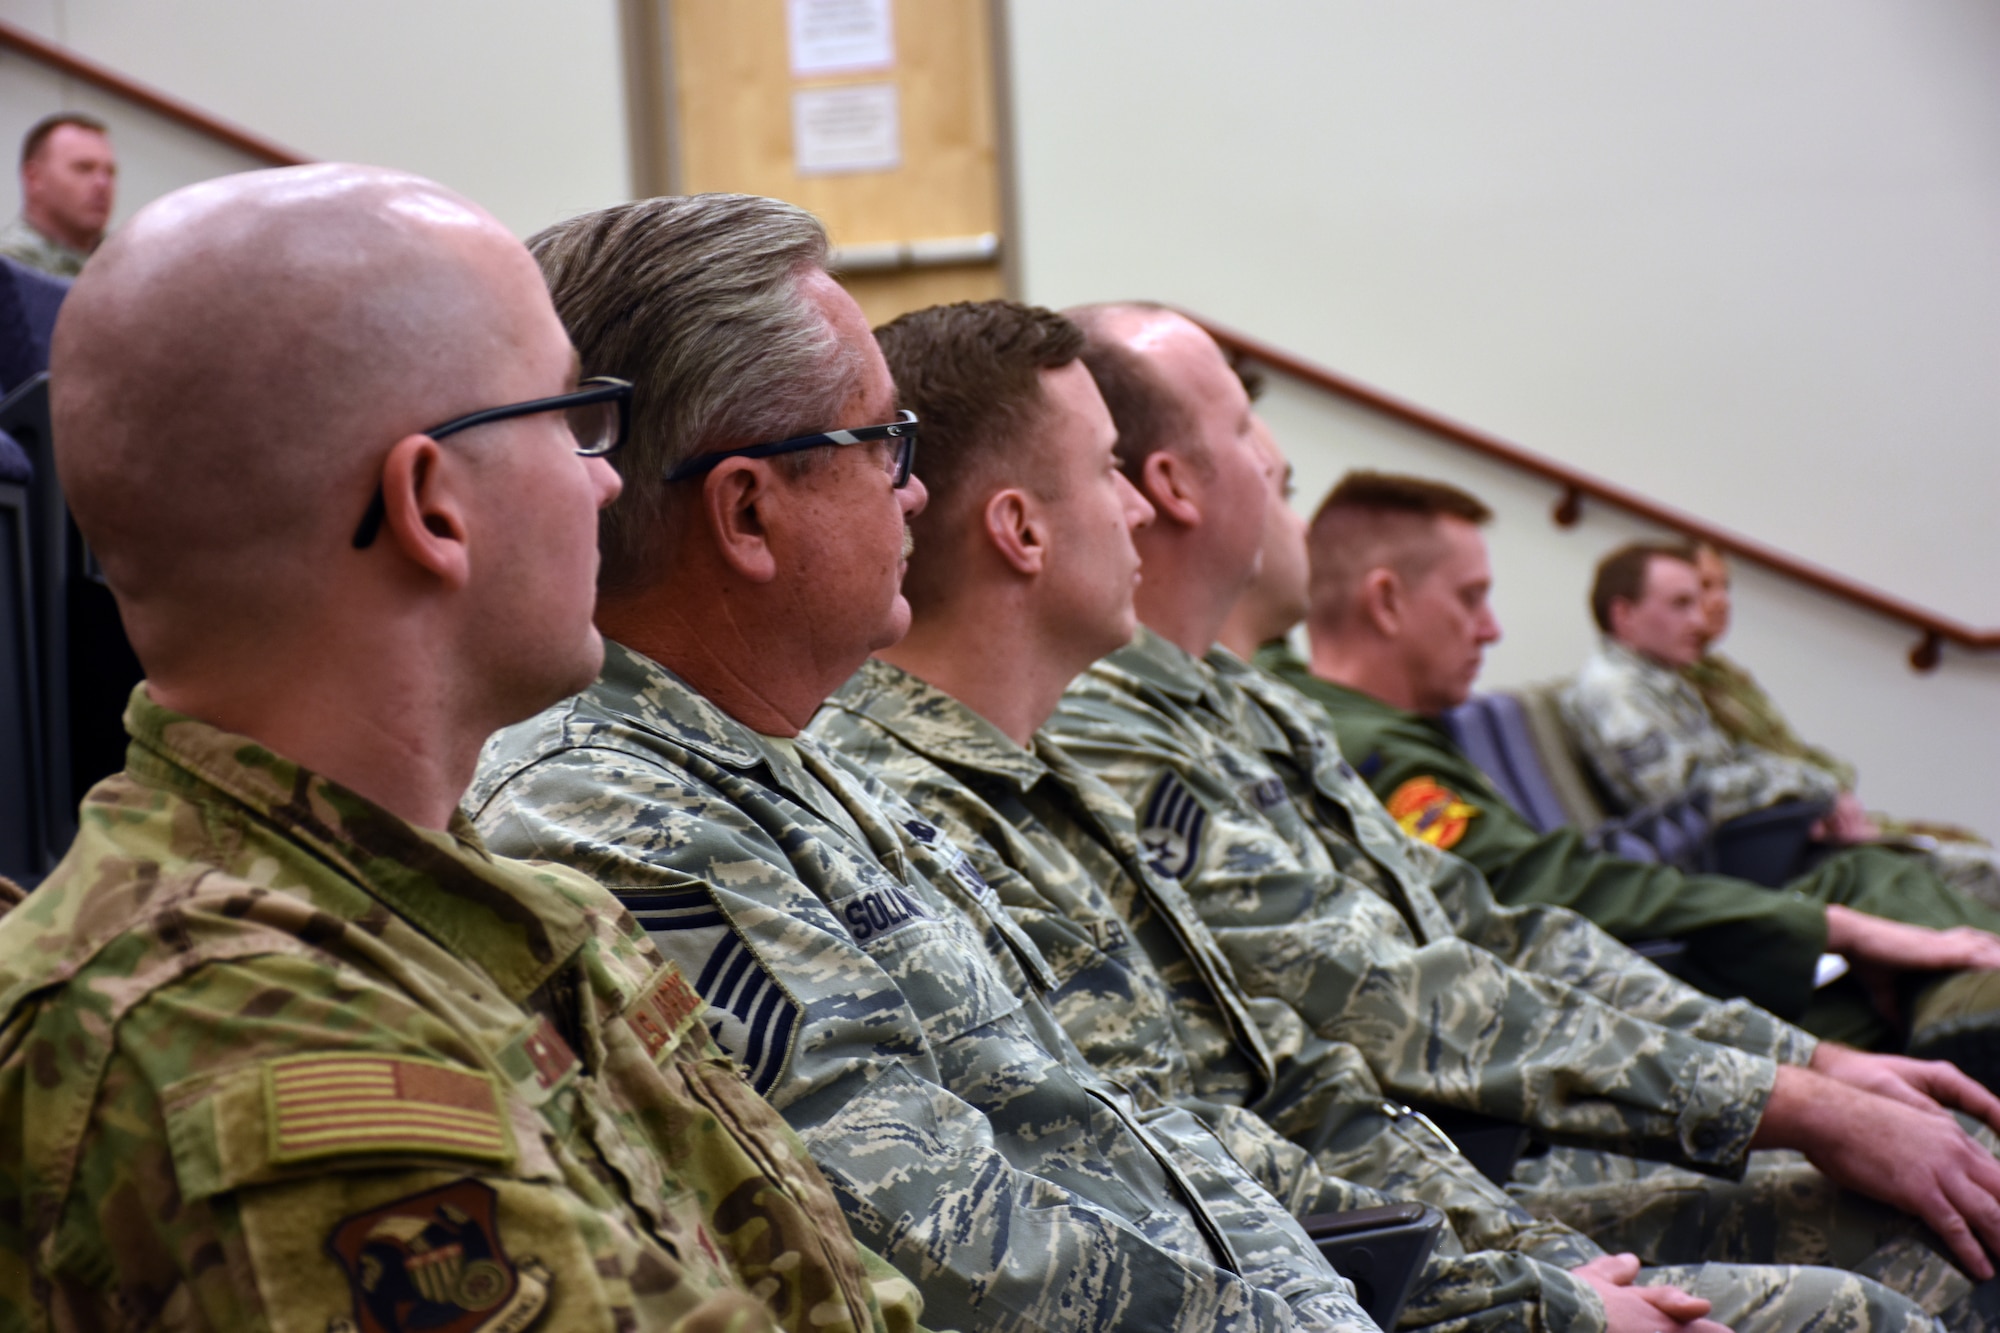 Community College of the Air Force graduates listen to opening remarks during a graduation ceremony at Whiteman Air Force Base, Mo., Dec. 8, 2019.